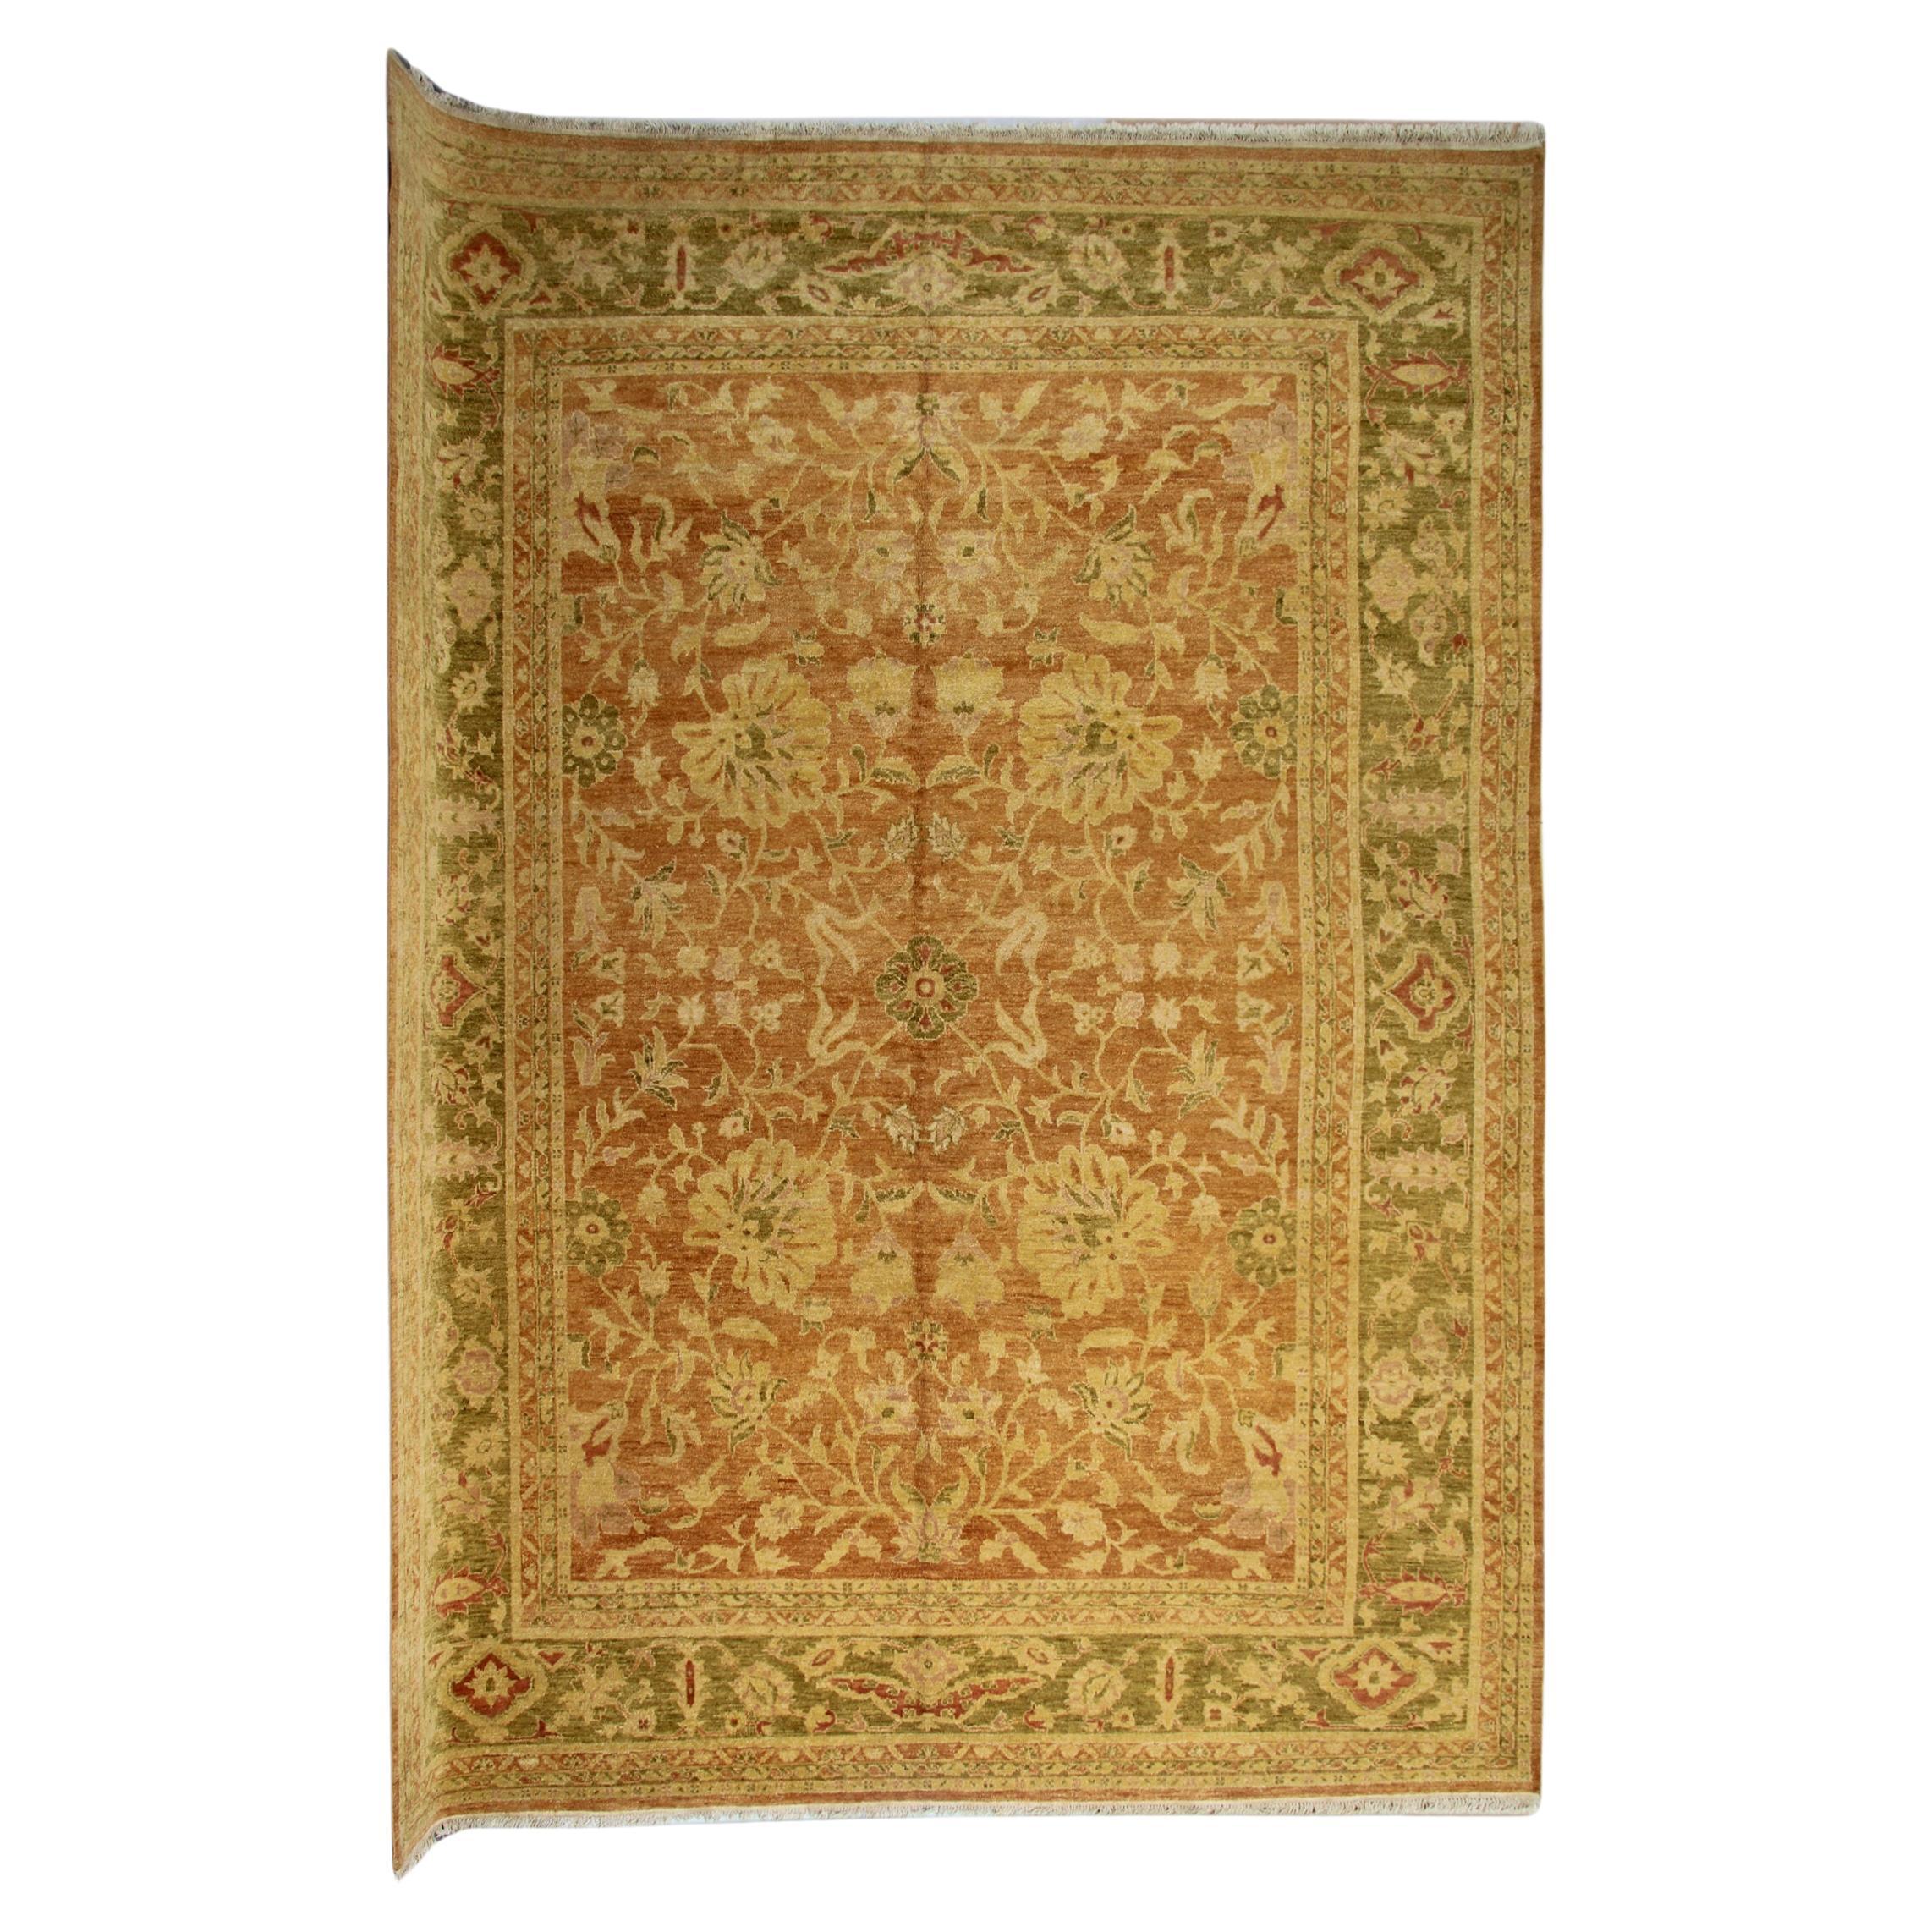 Faithful to the style of many stunning Indian Agra rugs, this masterpiece, which features an antique Persian rug design, combines vibrant colors with elegantly flowing floral motifs to create a sophisticated surface that can add impeccable style and